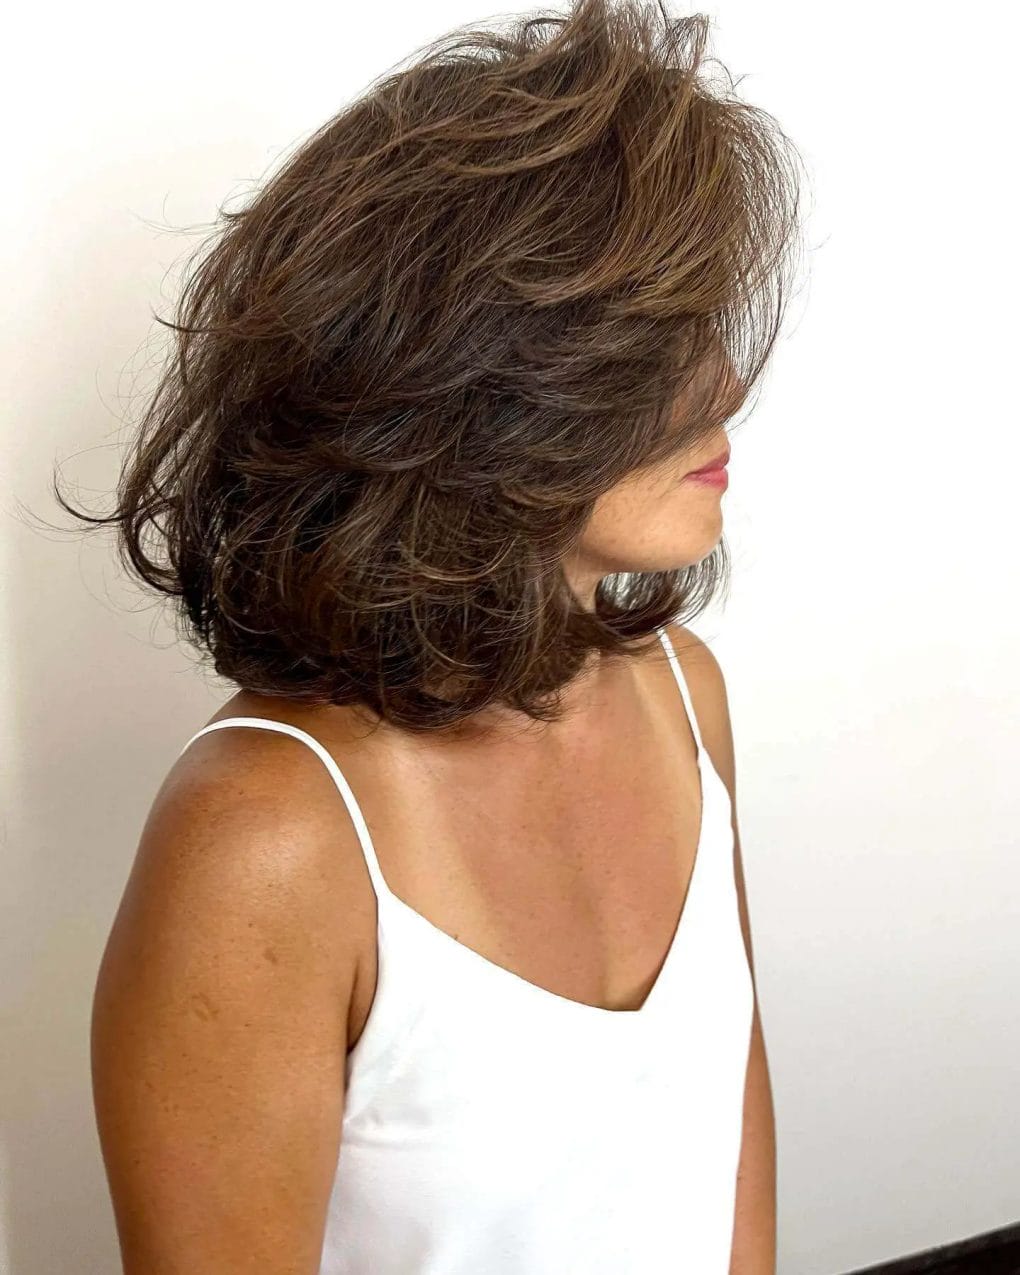 Voluminous tousled layered bob in warm brunette with subtle highlights.